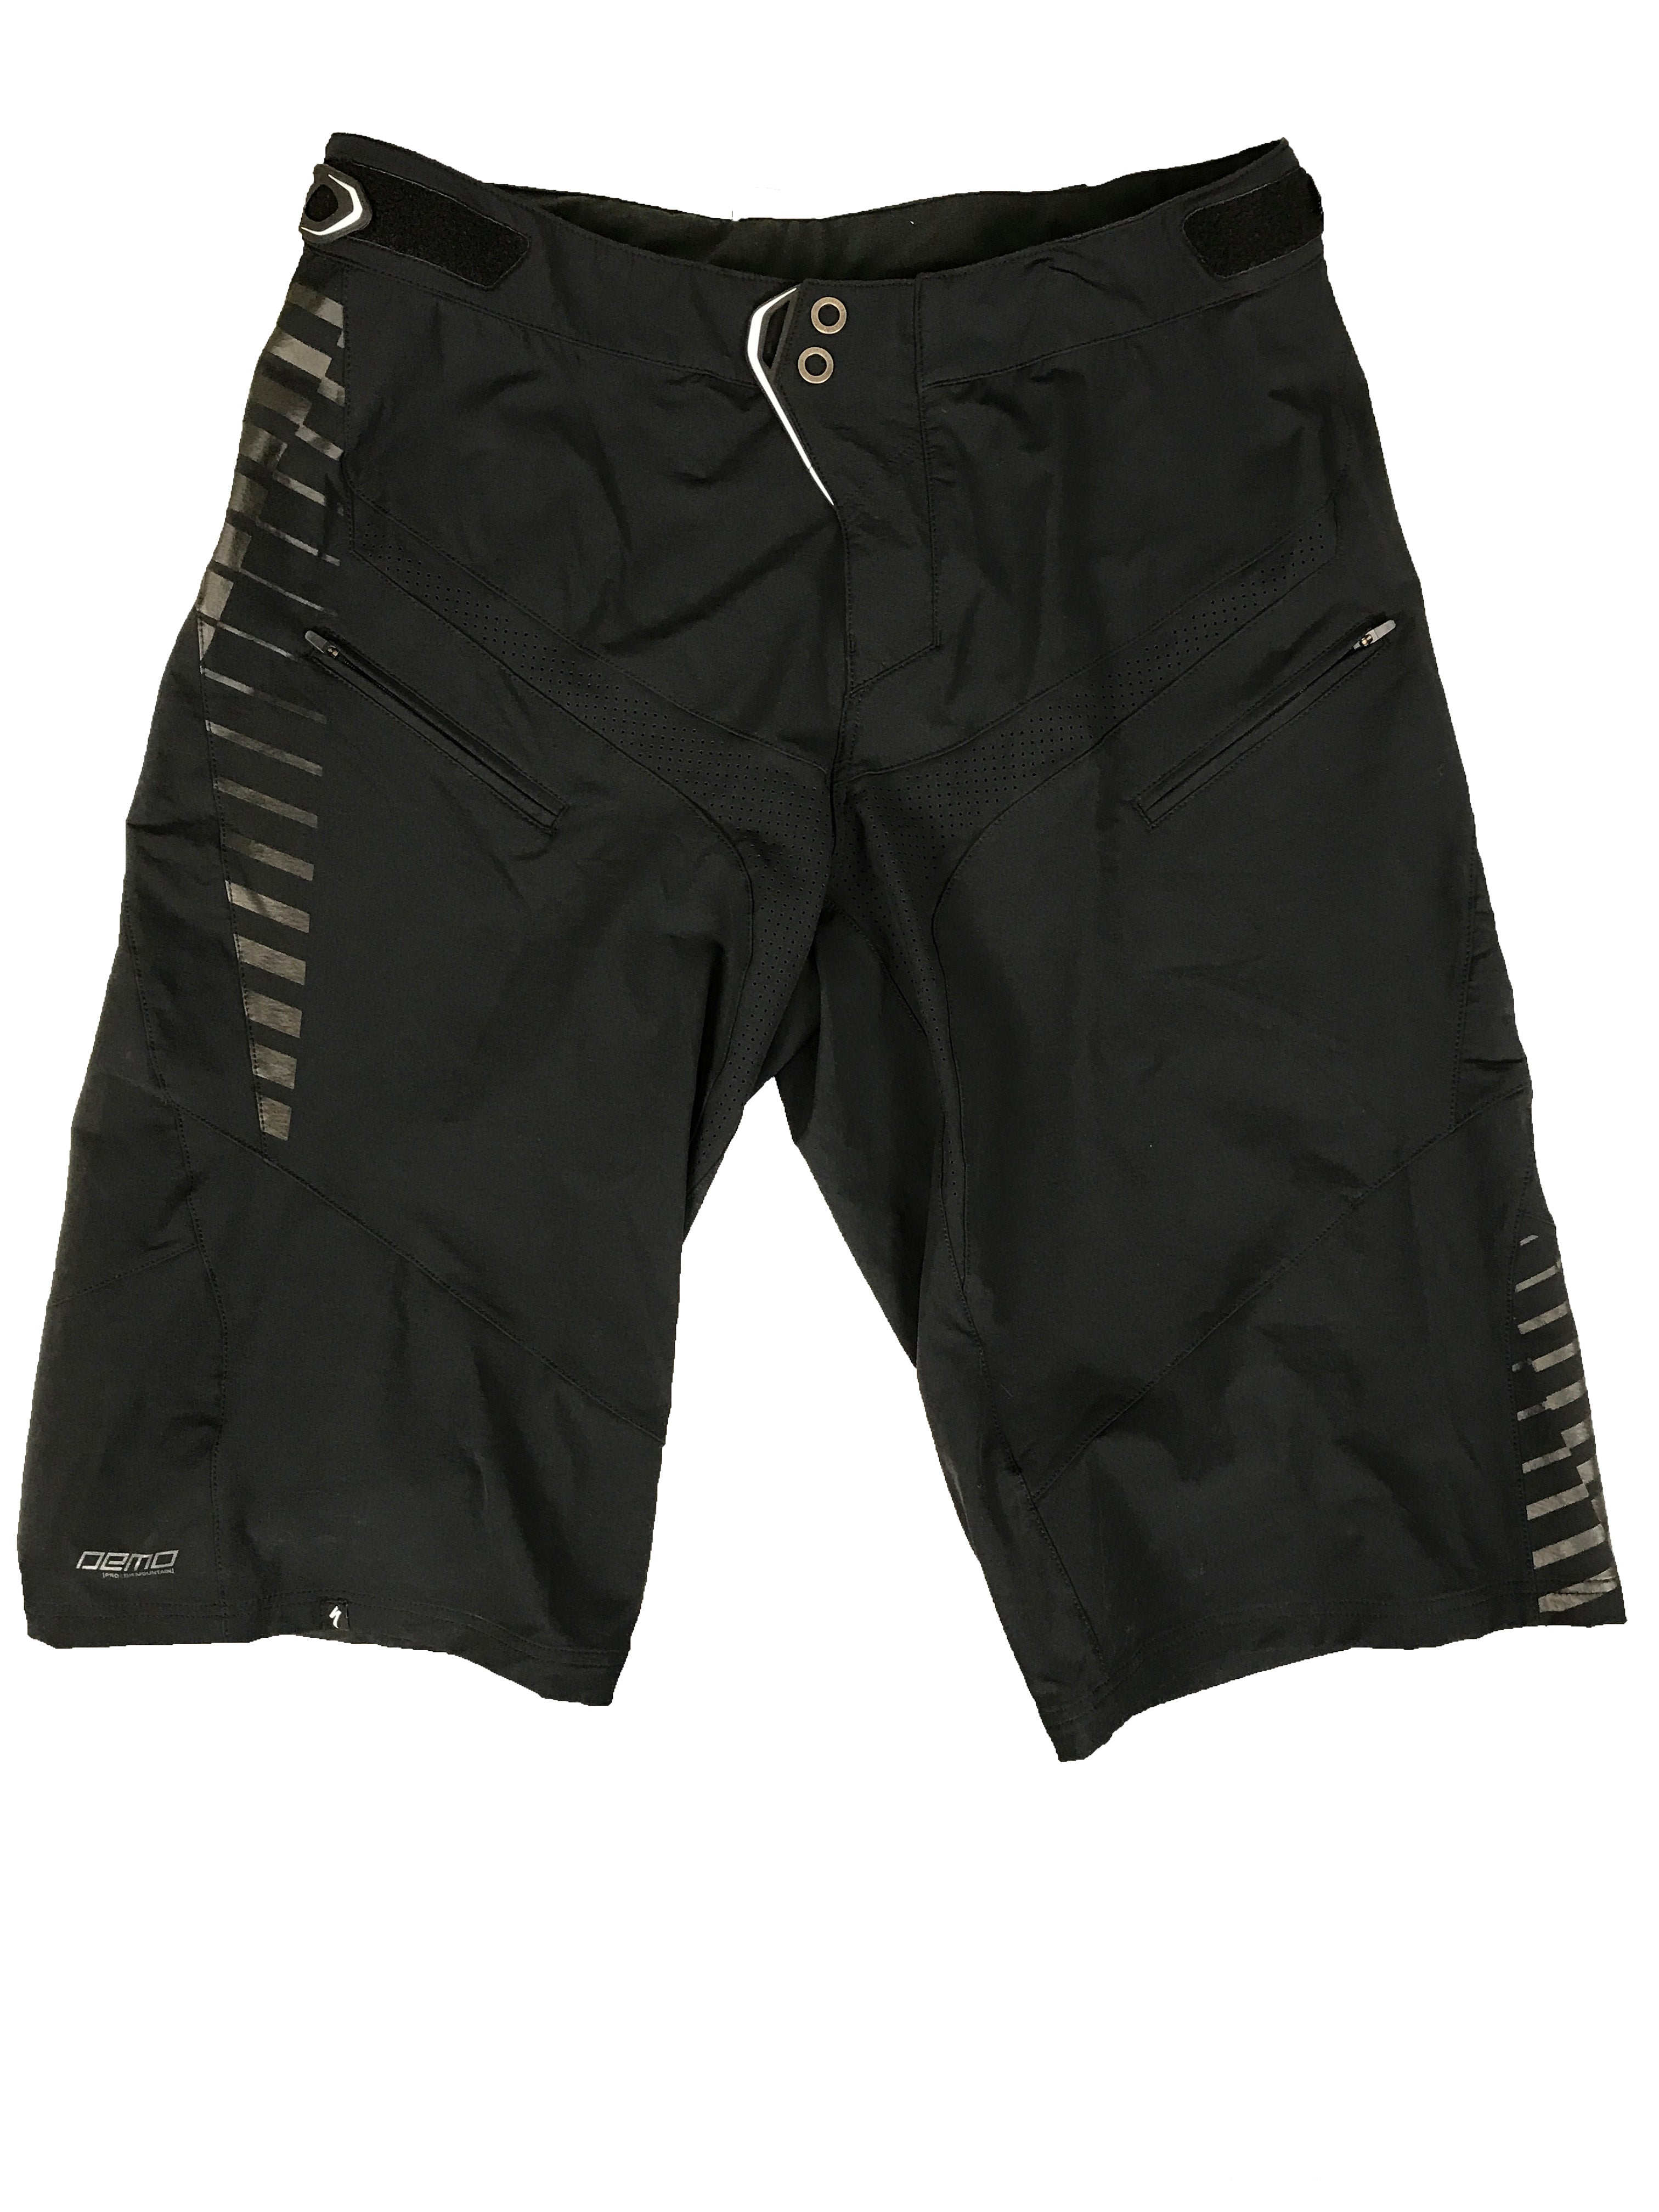 Specialized Demo Pro Black Shorts Men's Size 40 NWT